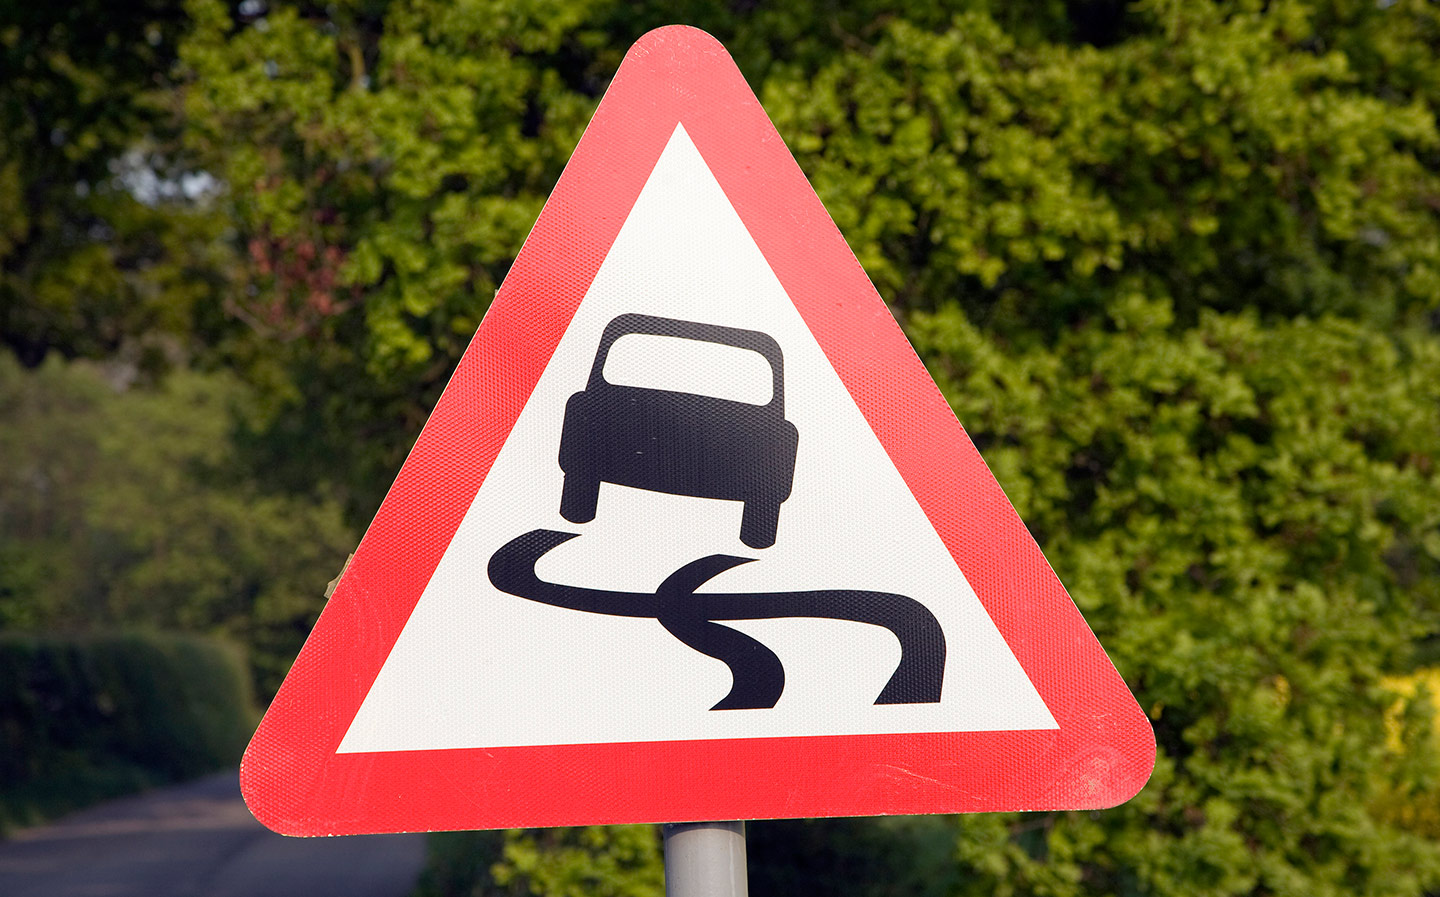 Skid risk grows on the UK’s crumbling roads